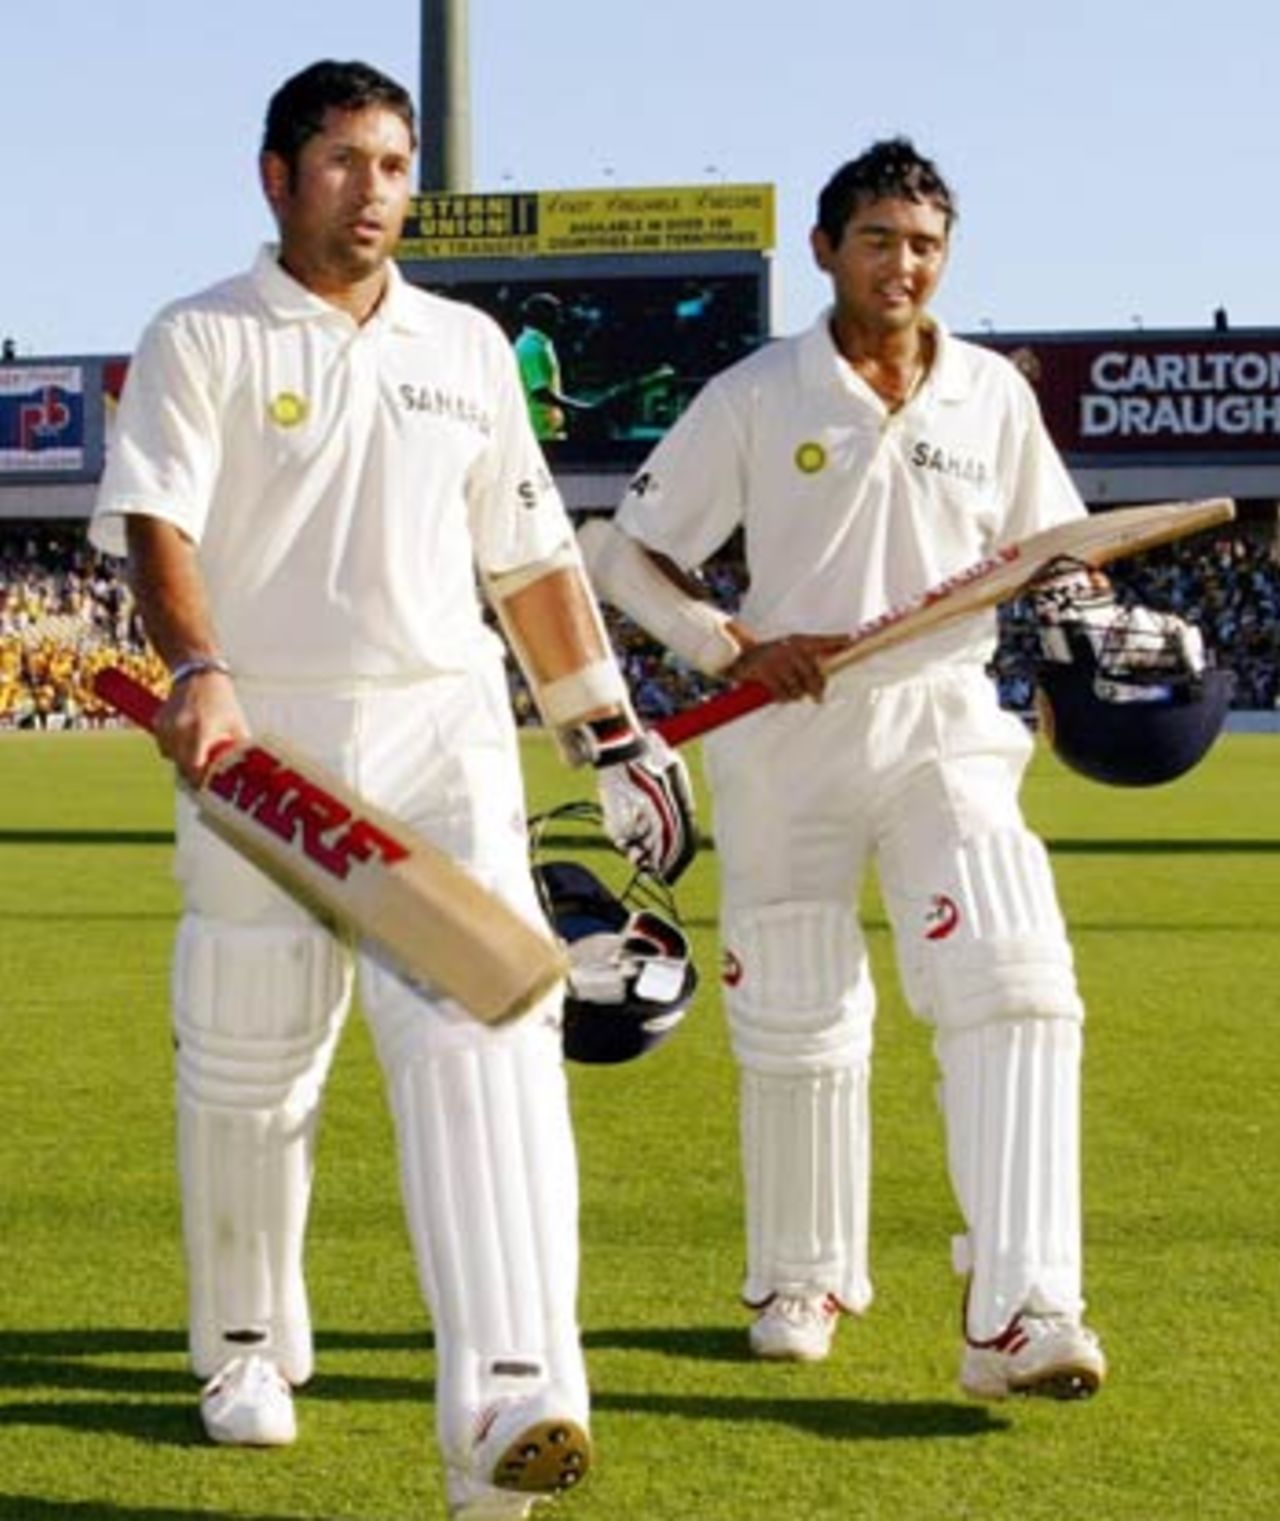 Sachin Tendulkar and Parthiv Patel walk off as India end the second day well on top, Australia v India, 4th Test, Sydney, 2nd day, January 3, 2004